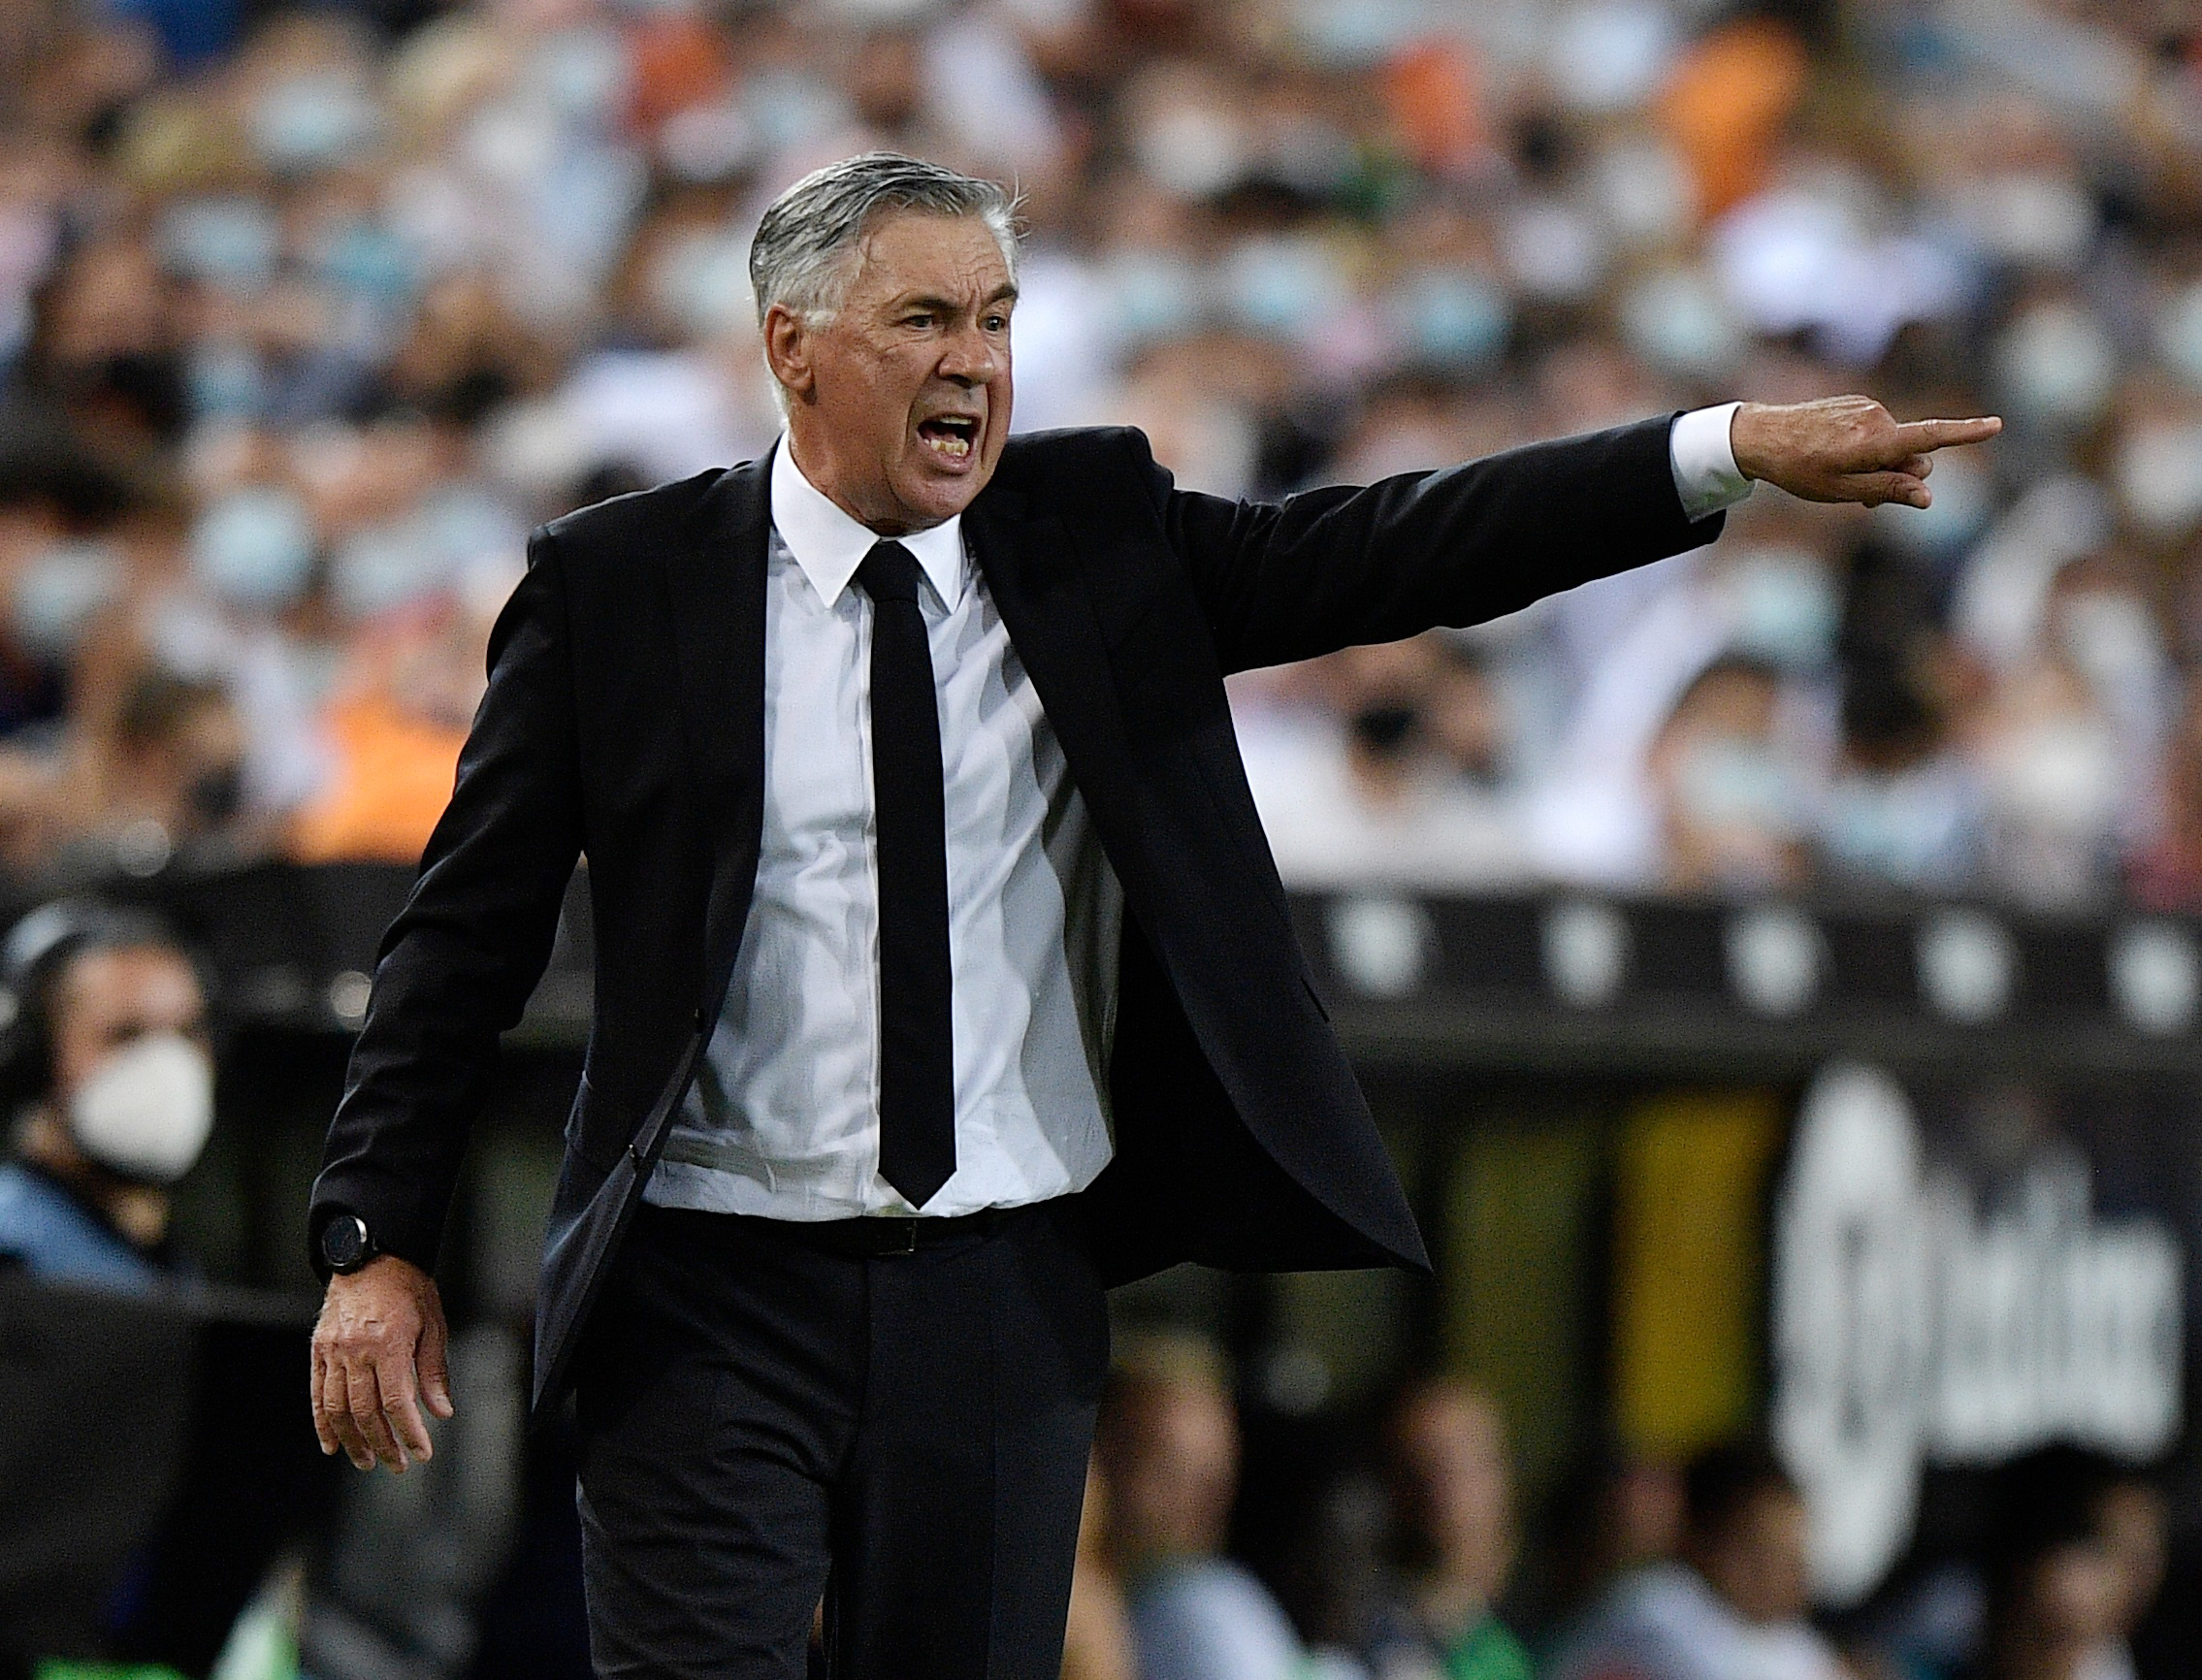 Champions League: What inspired Real Madrid’s comeback against Man City -Ancelotti